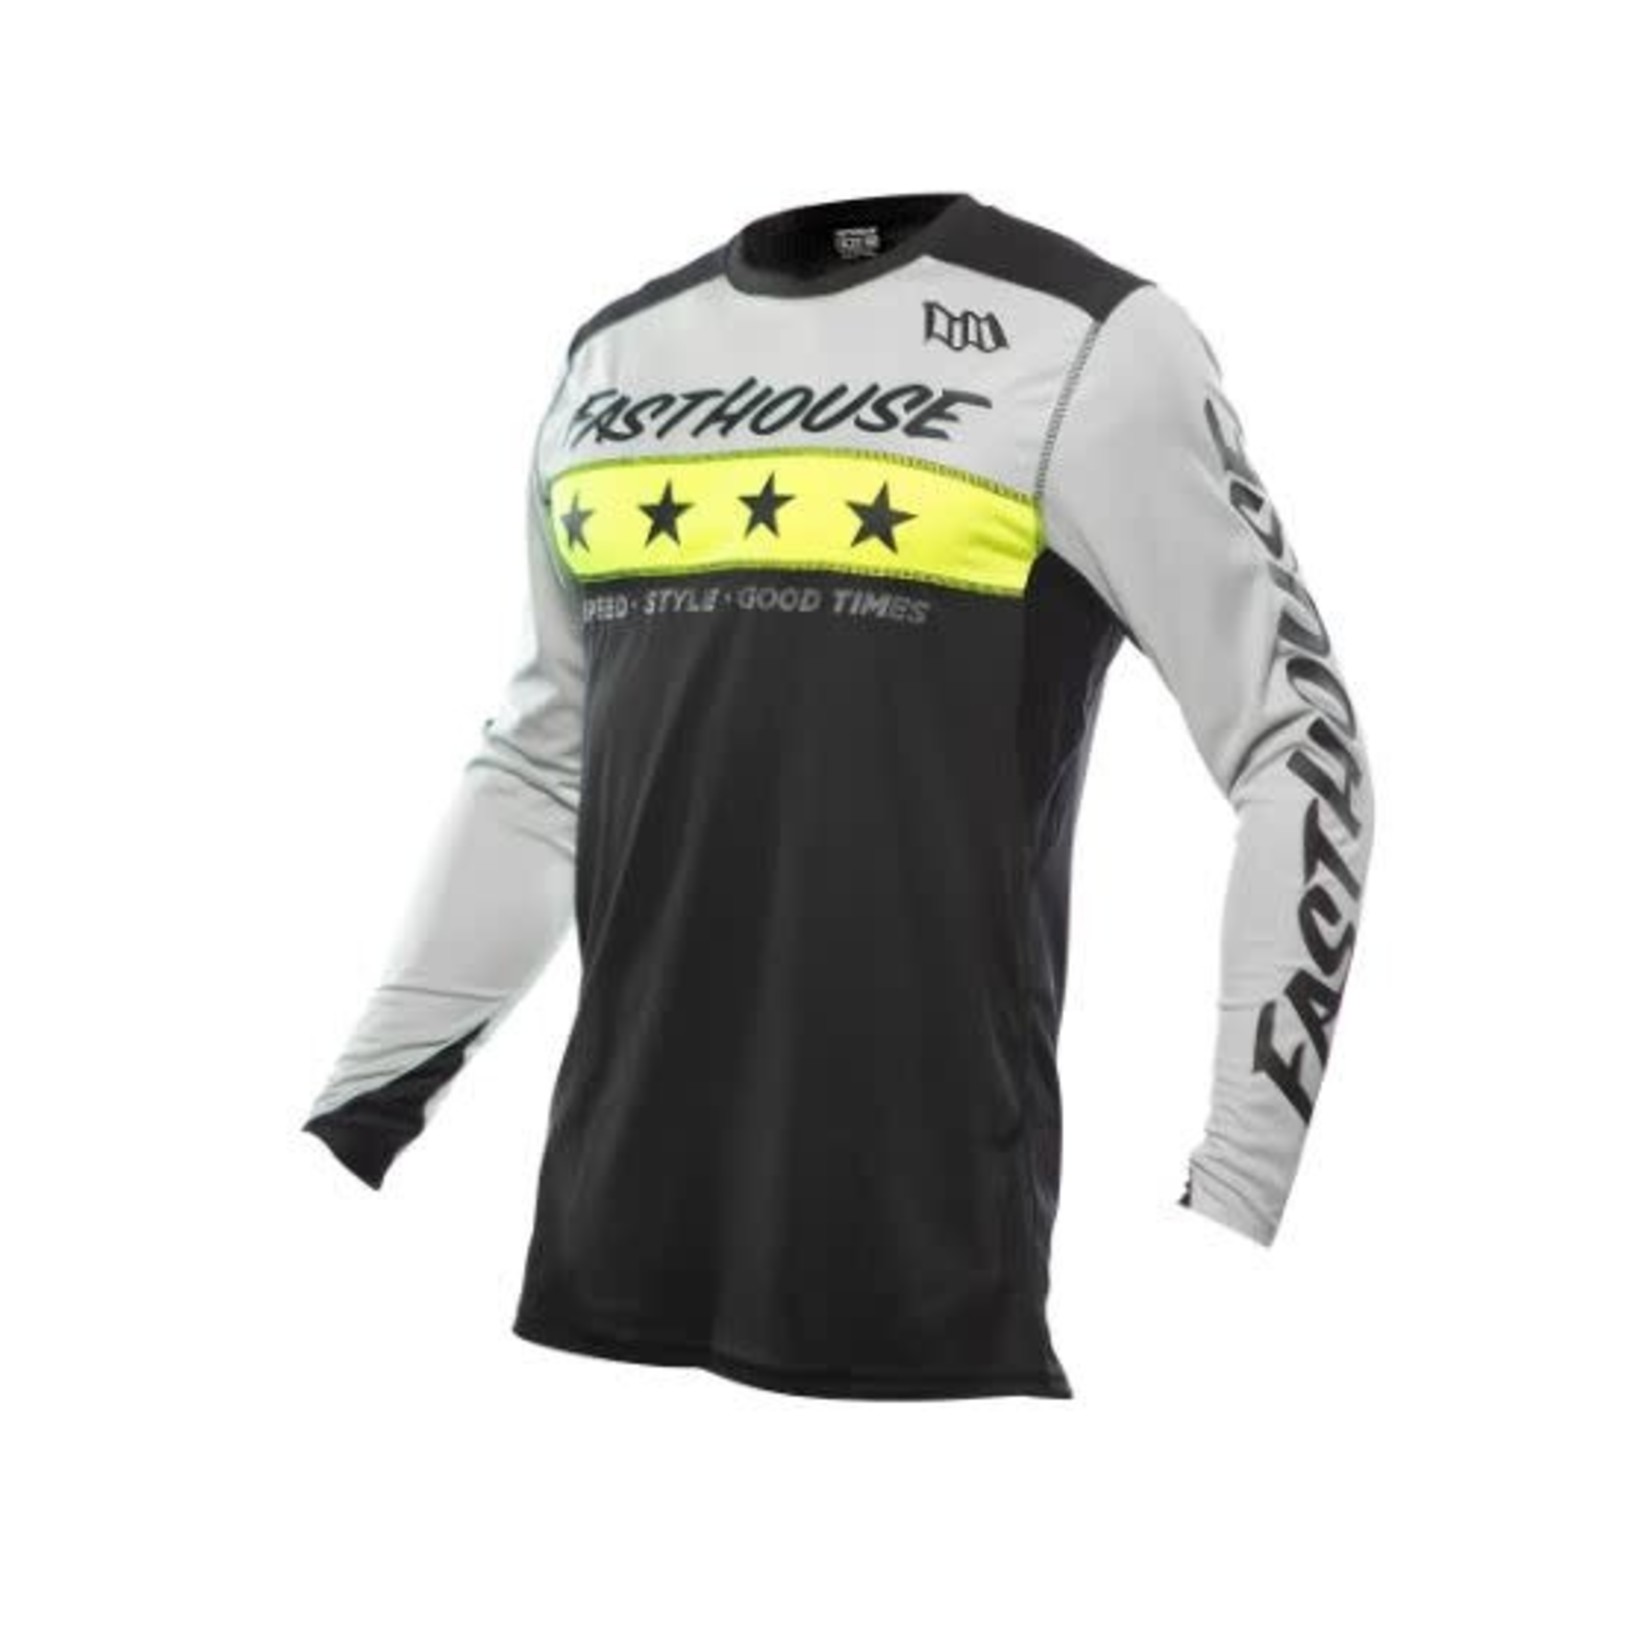 YOUTH- Elrod Astre Jersey